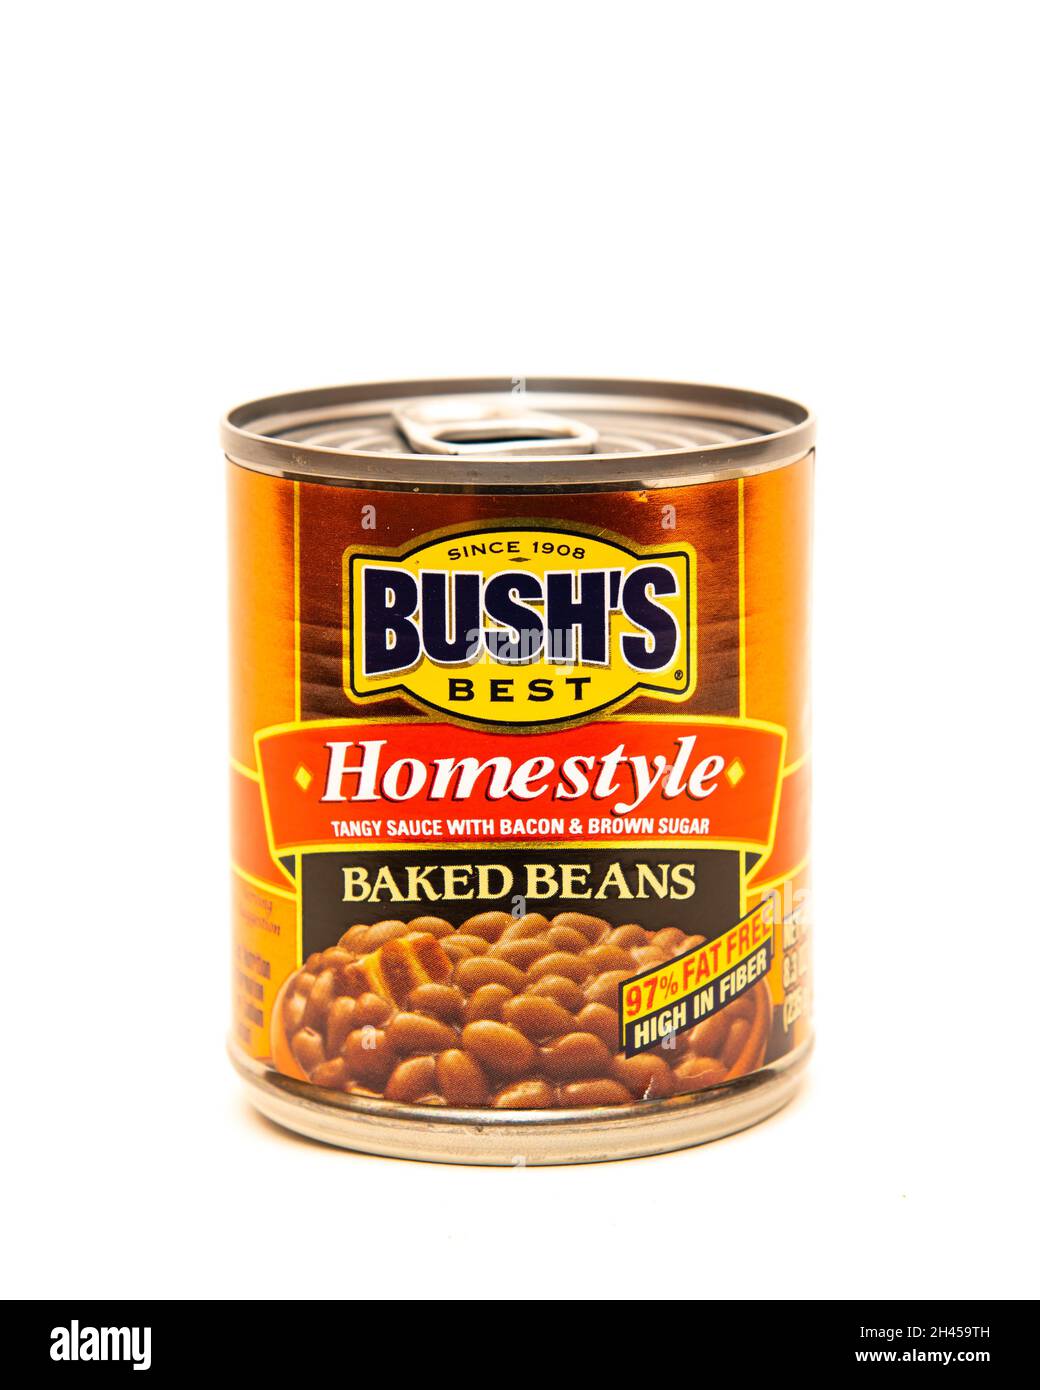 A can of Bush's best homestyle baked beans, made with tangy sauce with bacon and brown sugar. Stock Photo